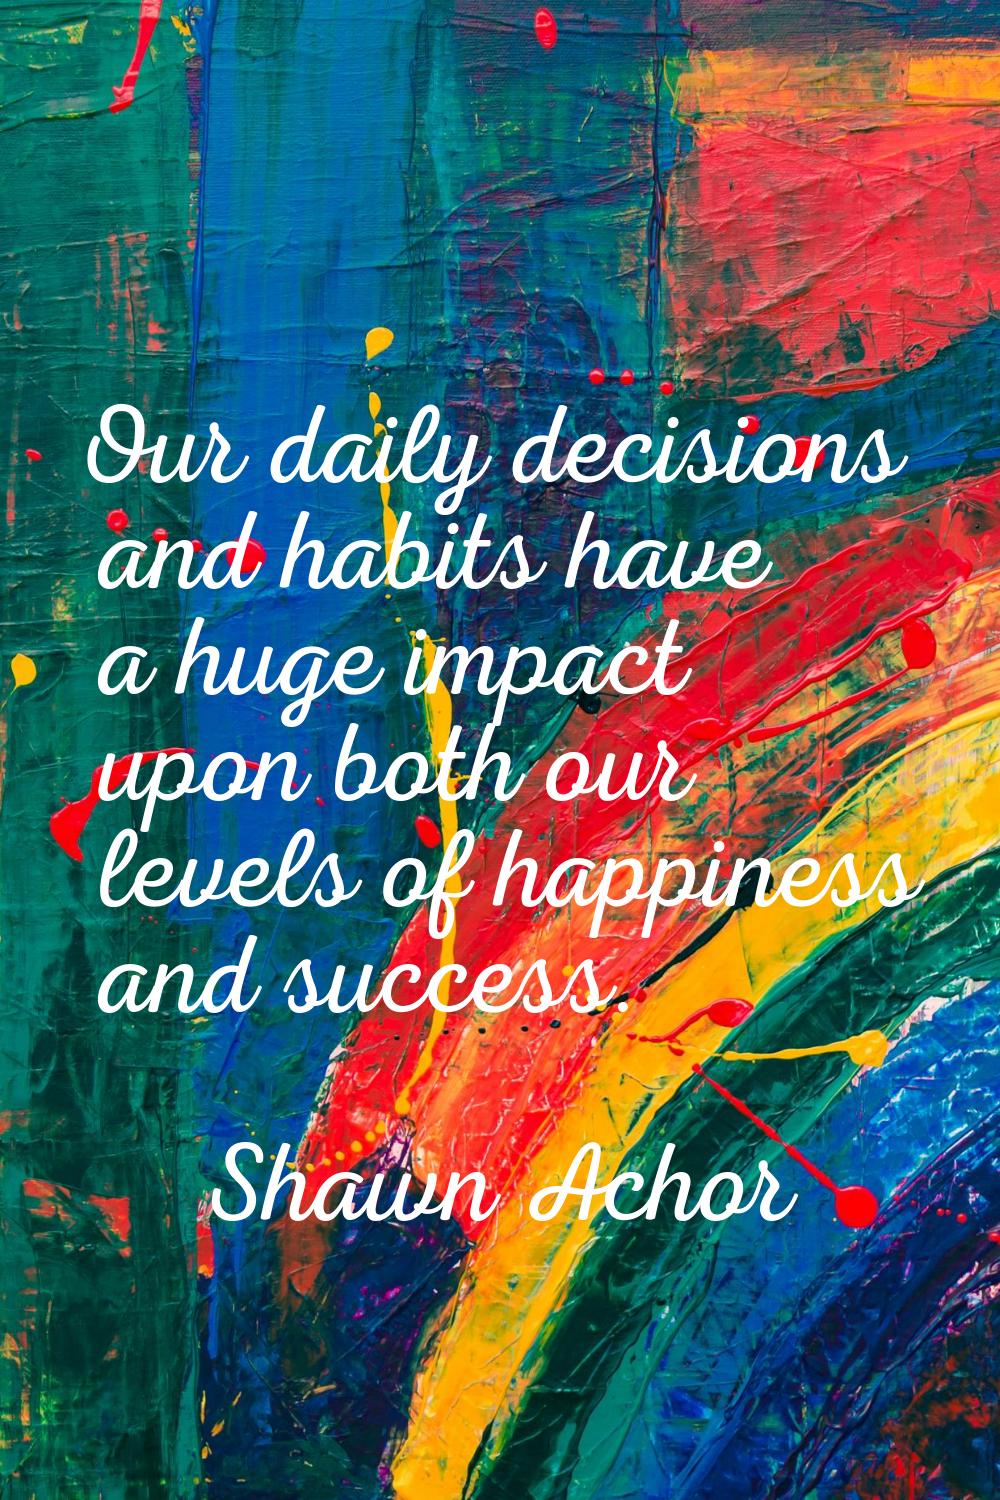 Our daily decisions and habits have a huge impact upon both our levels of happiness and success.